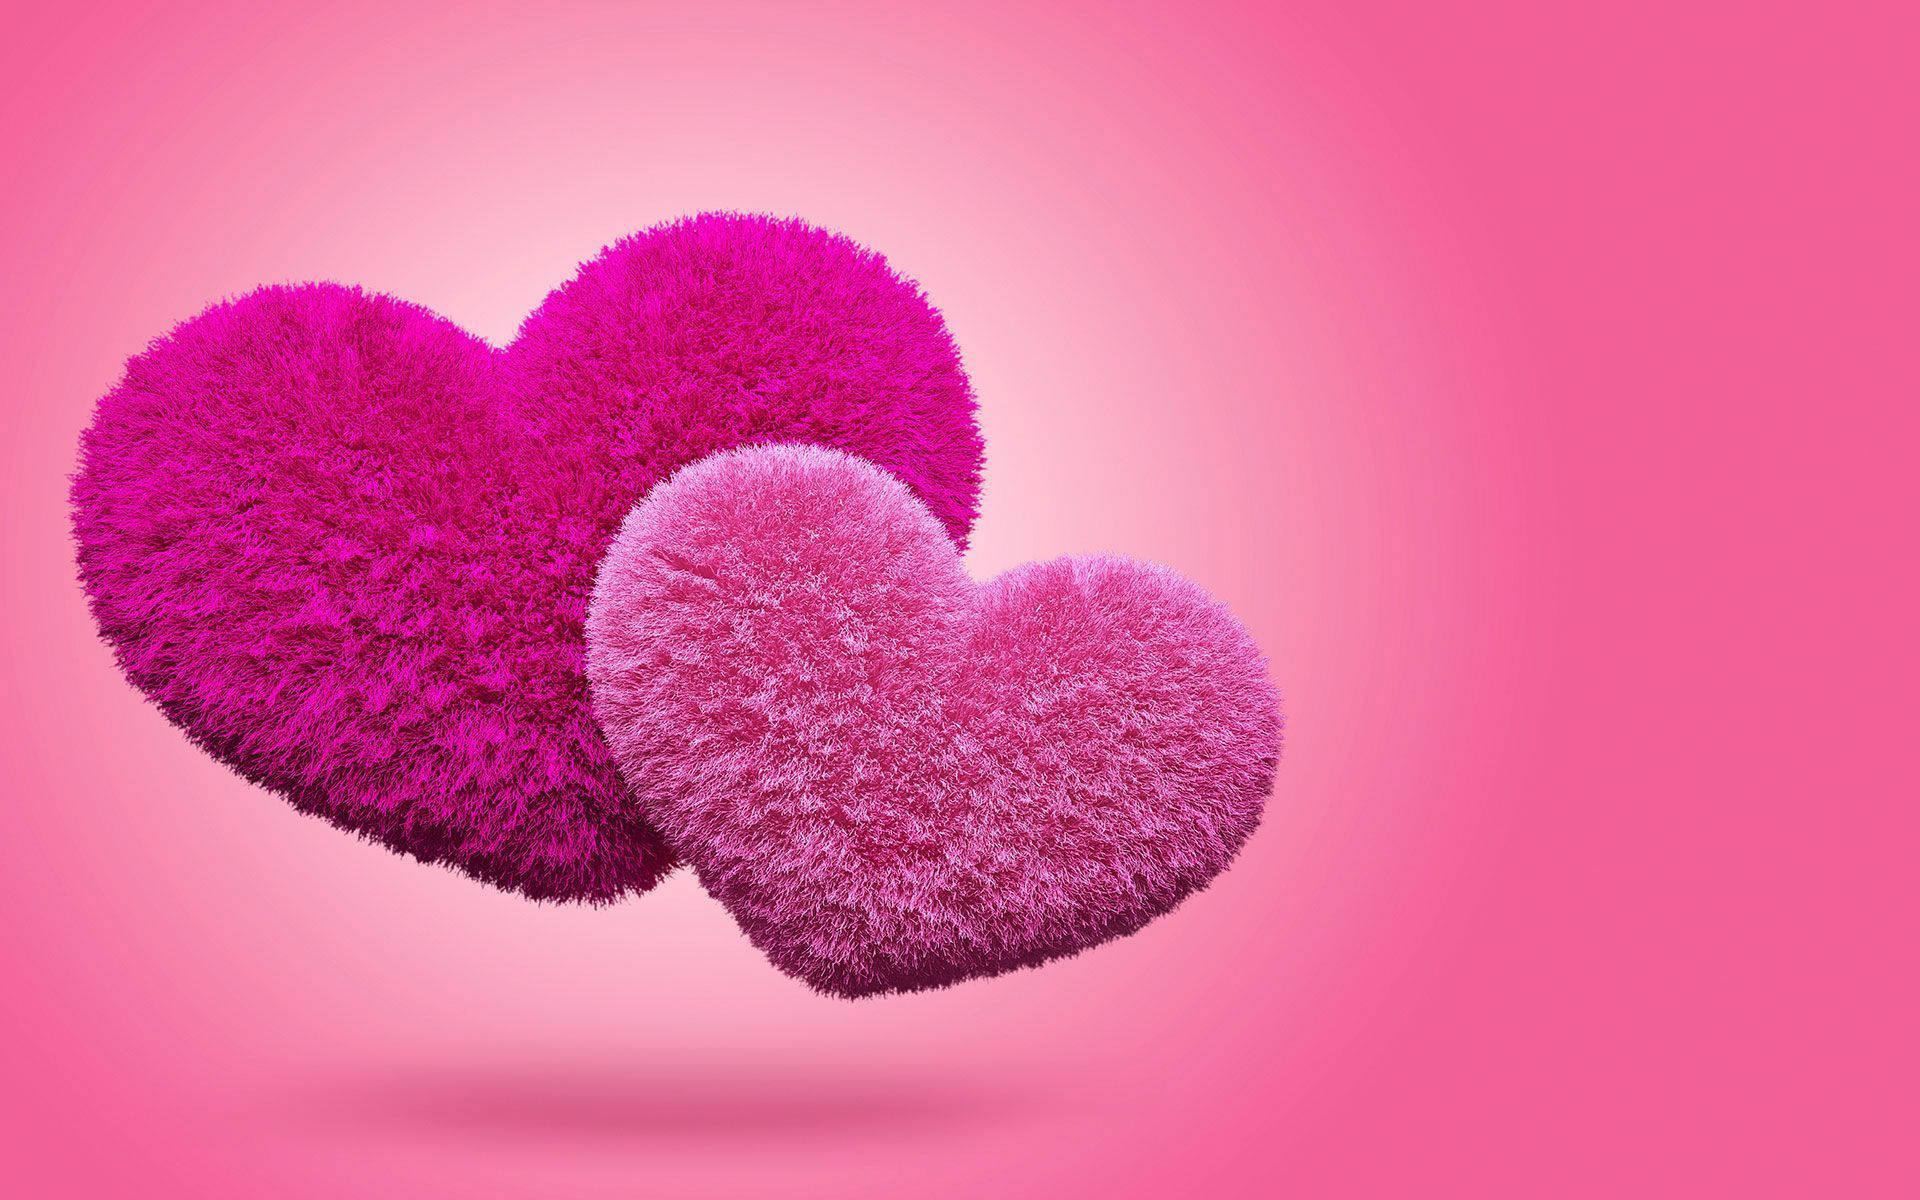 Cute Love Pillows In The Shape Of Heart Wallpaper